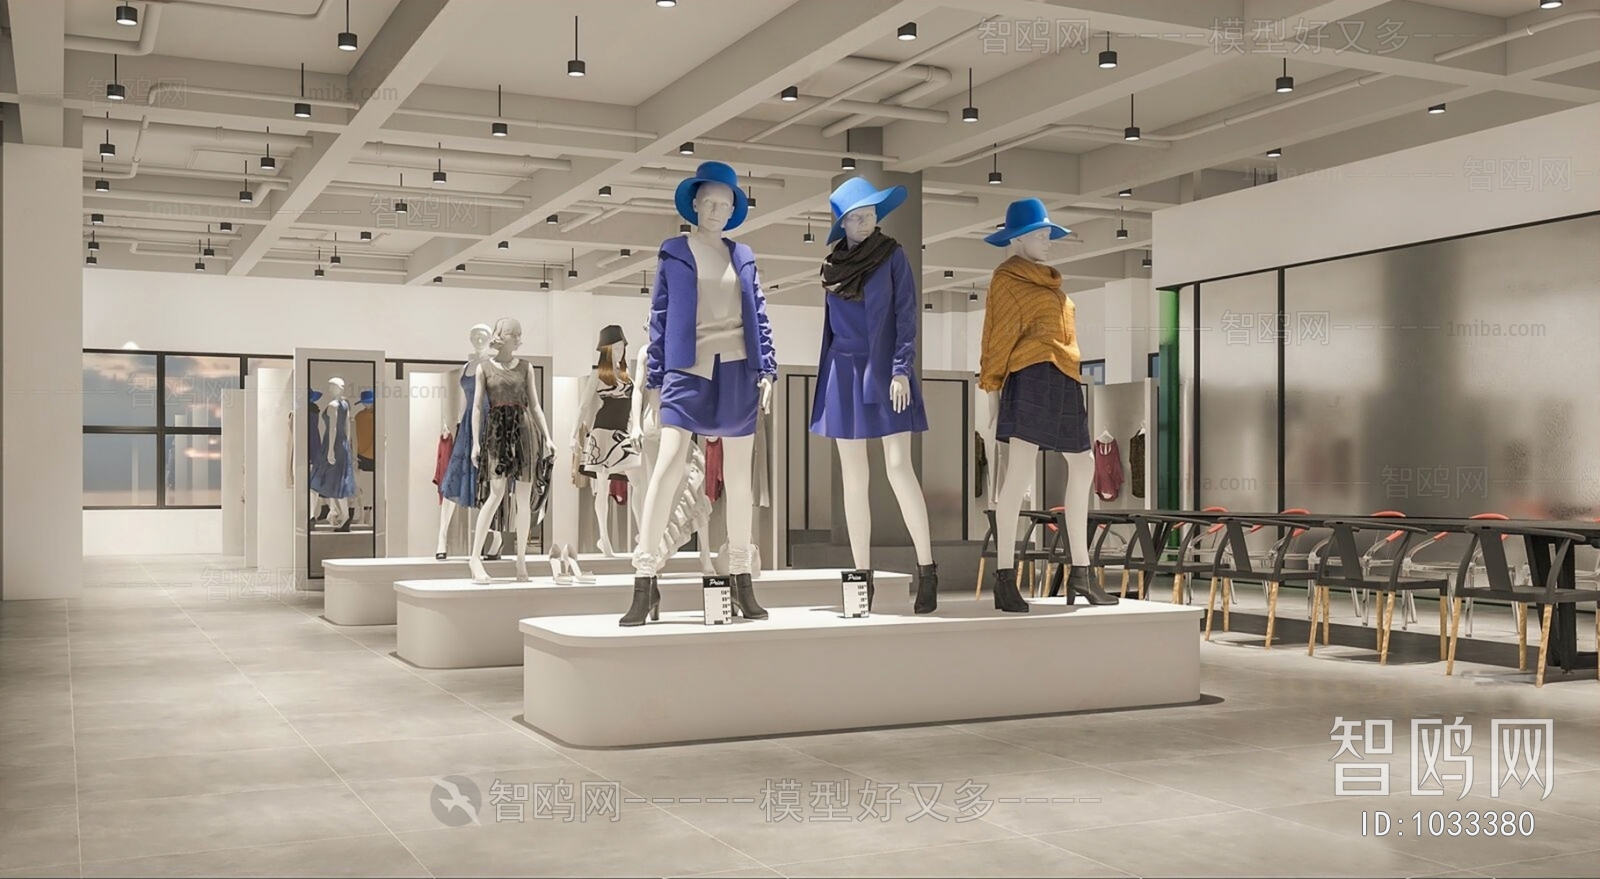 Modern Clothing Store